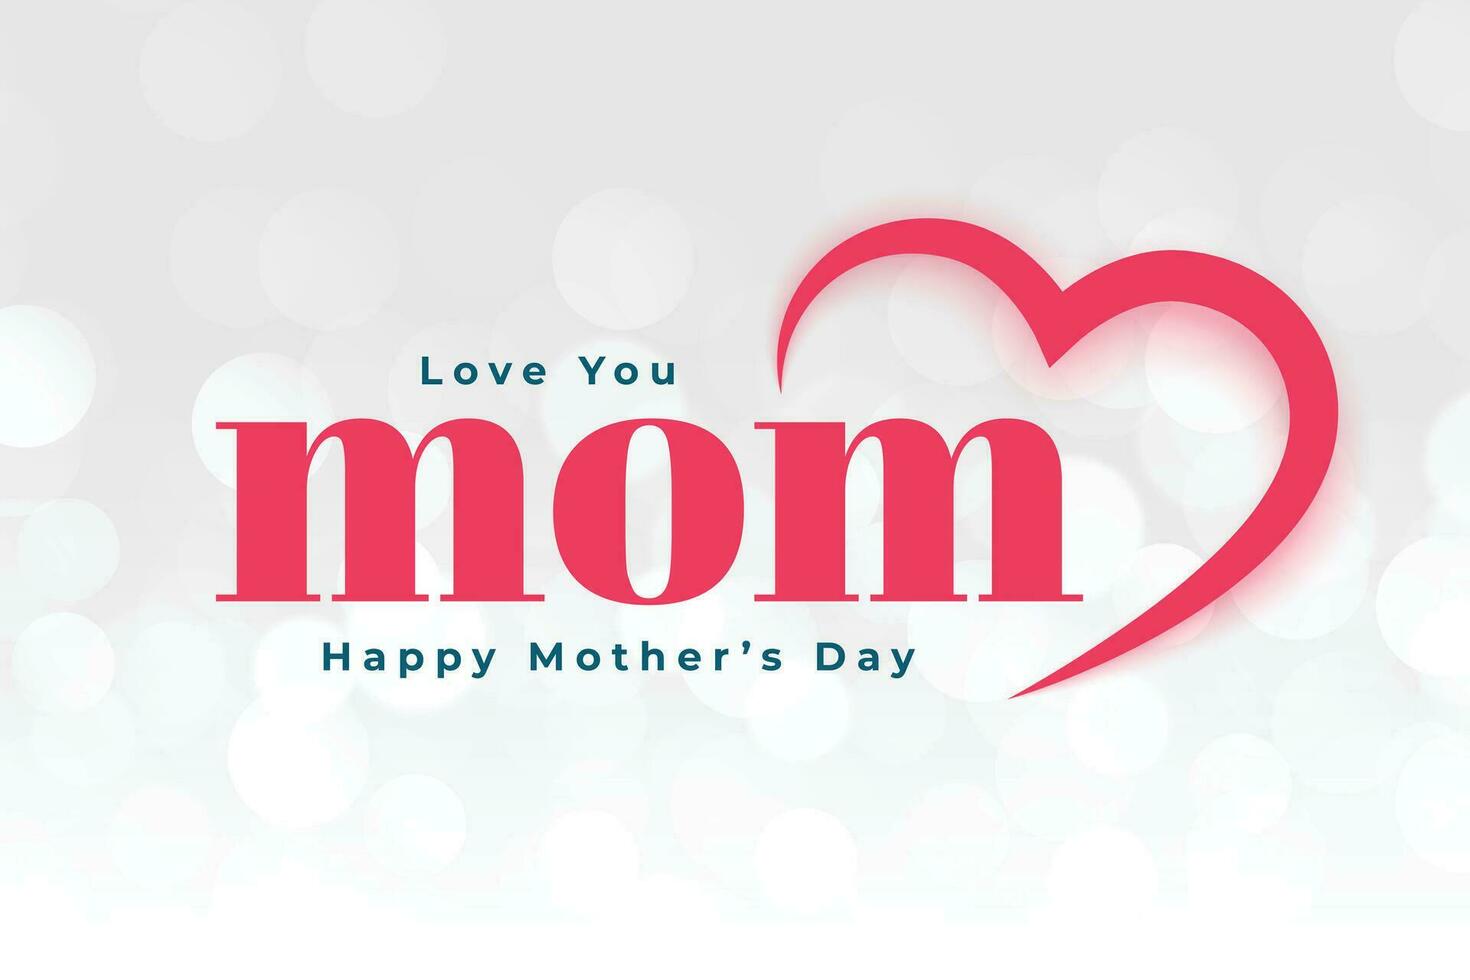 love you mom happy mothers day greeting design vector